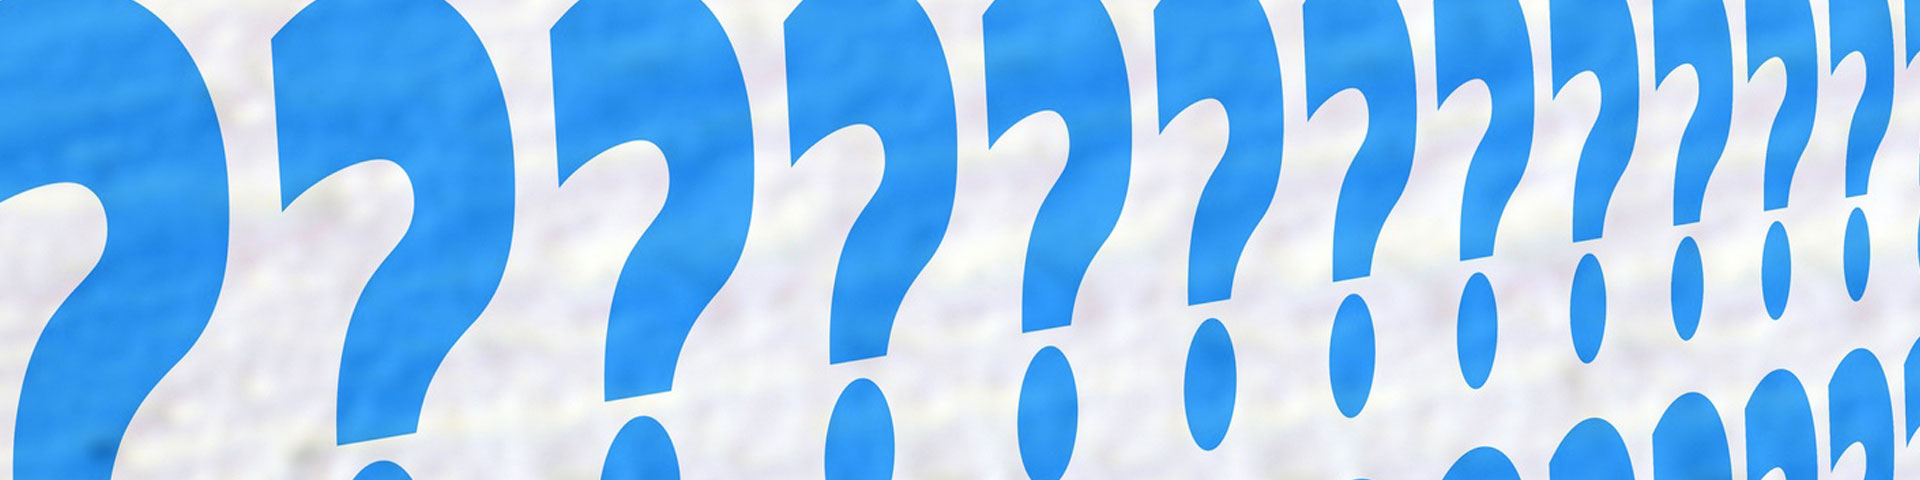 A row of large blue question marks on a white backdrop